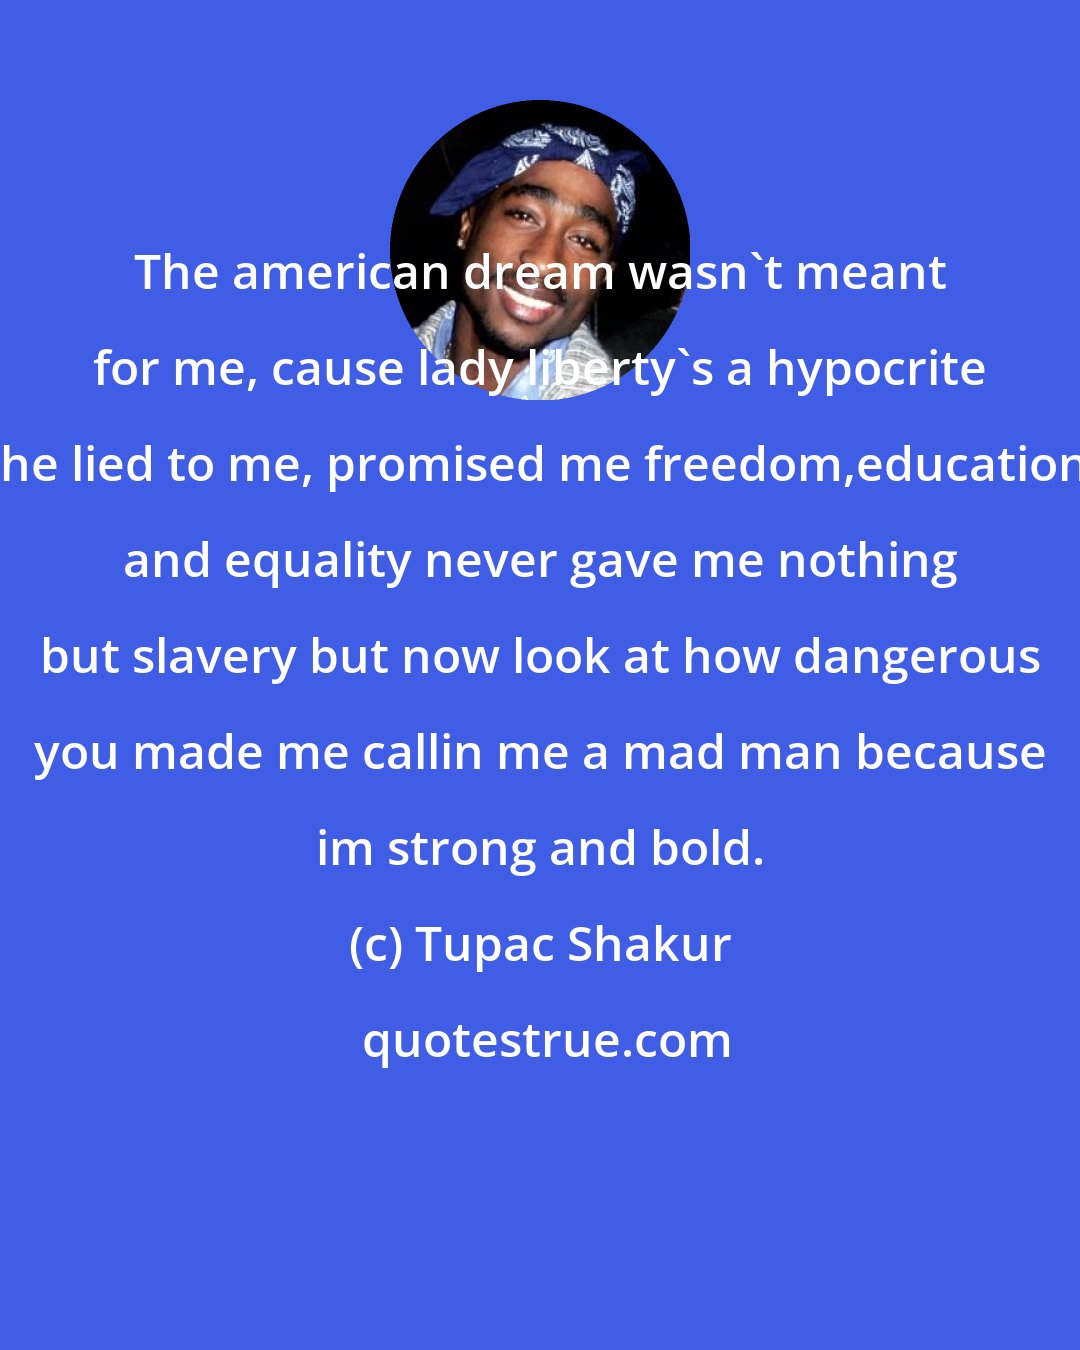 Tupac Shakur: The american dream wasn't meant for me, cause lady liberty's a hypocrite she lied to me, promised me freedom,education, and equality never gave me nothing but slavery but now look at how dangerous you made me callin me a mad man because im strong and bold.